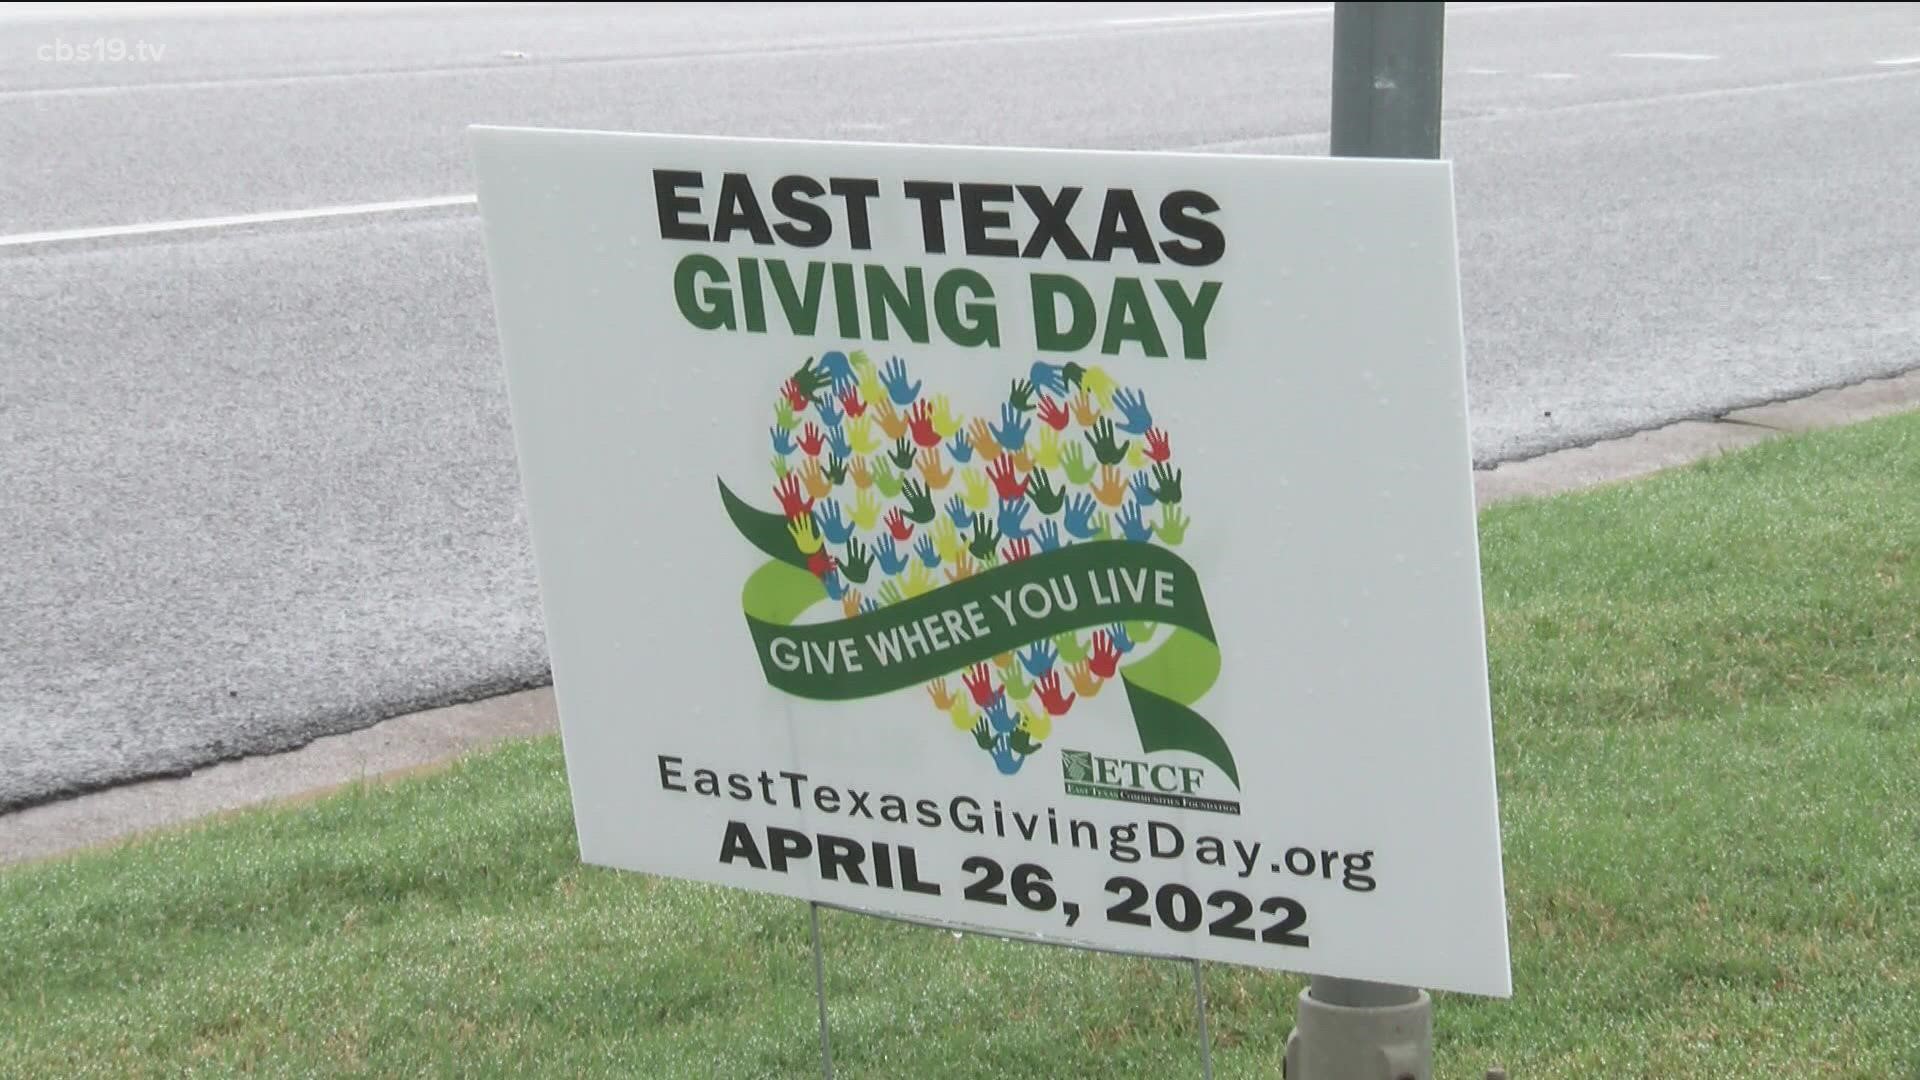 Give where you live for East Texas Giving Day.